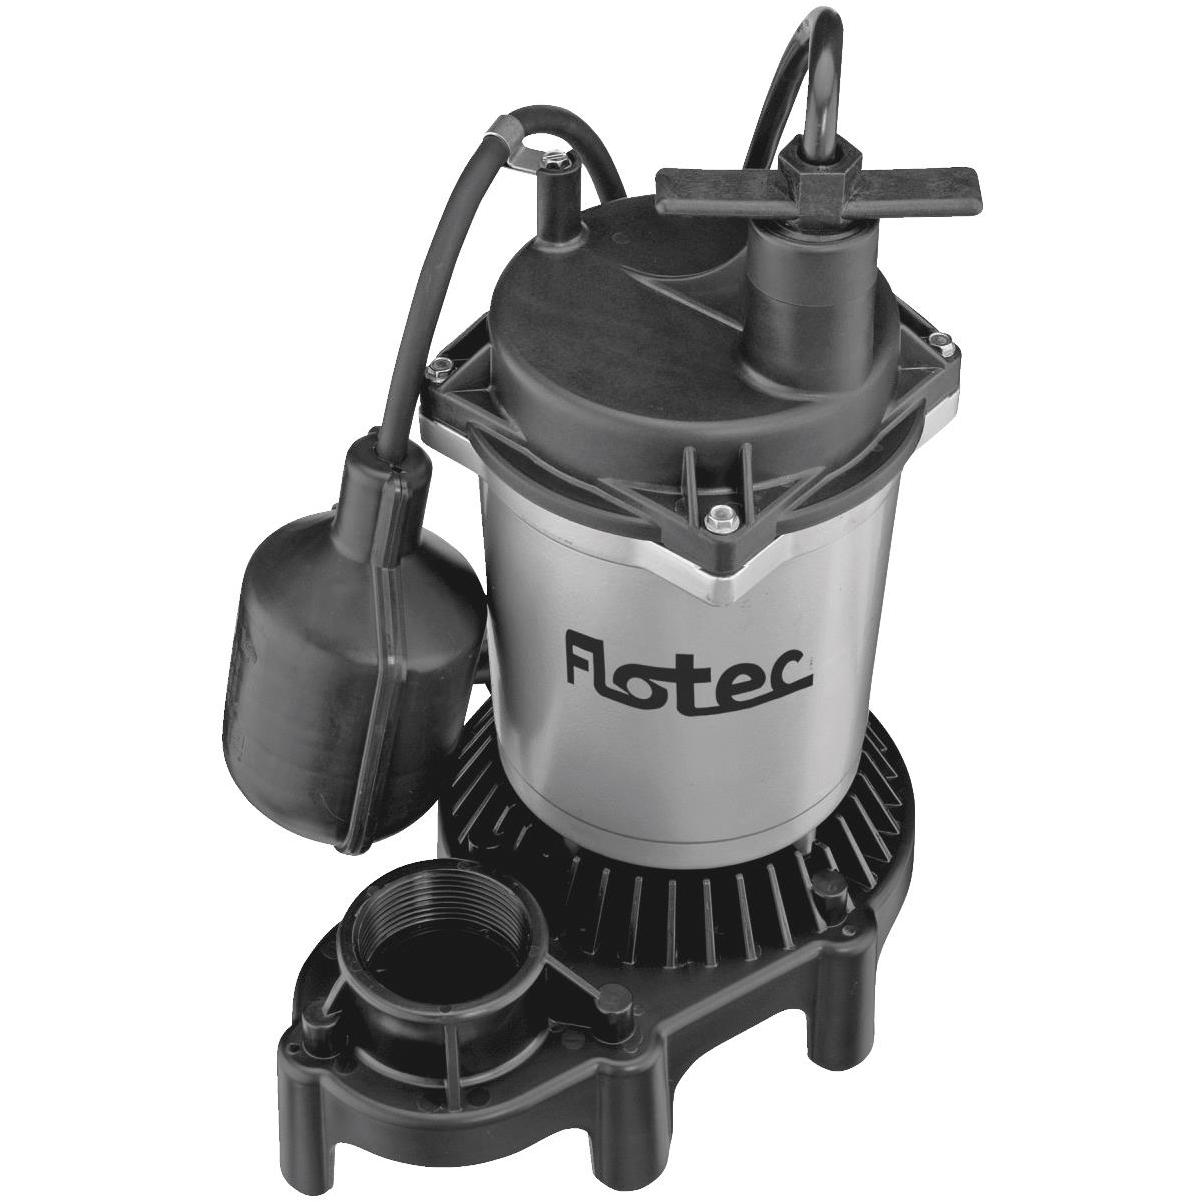 Flotec 1/2 HP 115V Submersible Sump Pump with Tethered Switch